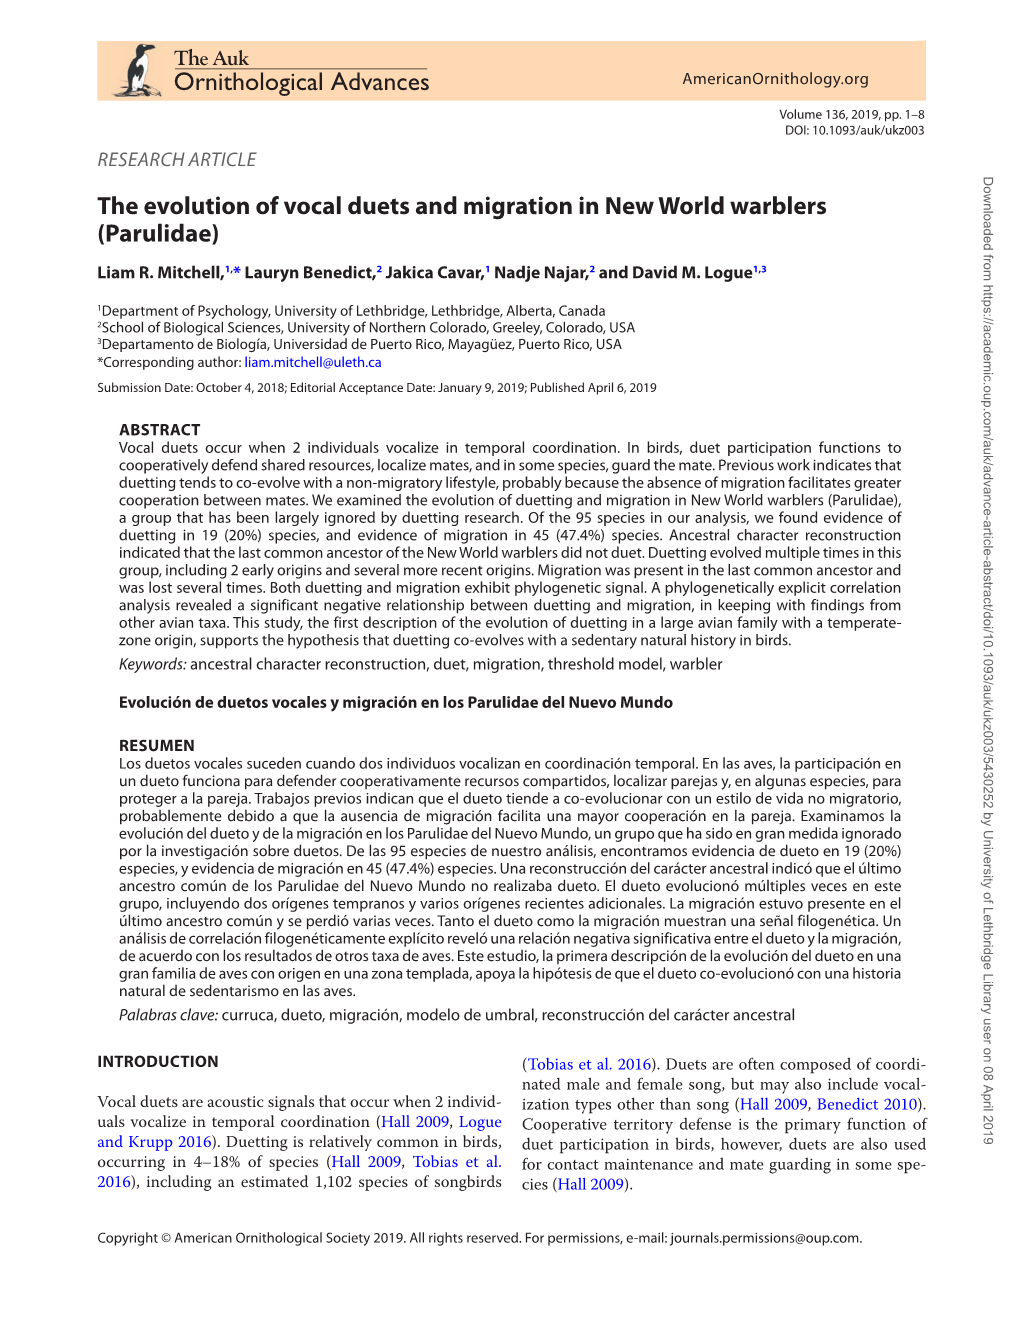 The Evolution of Vocal Duets and Migration in New World Warblers (Parulidae) Liam R